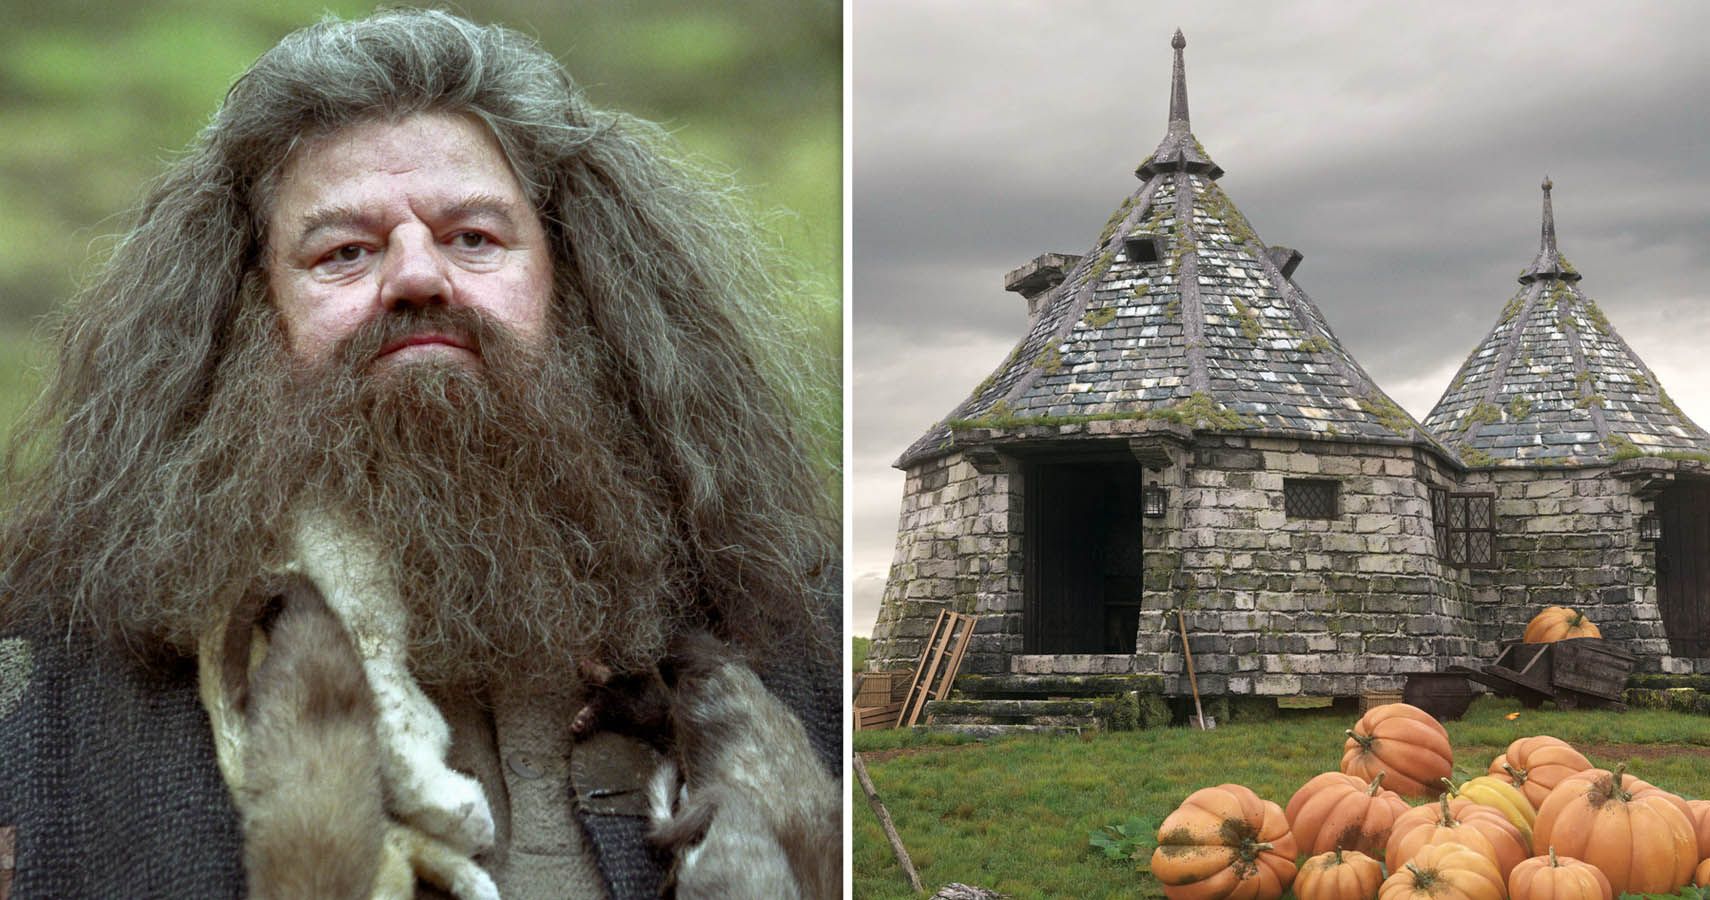 Harry Potter 10 Hagrid's Hut Moments The Movies Missed Out On